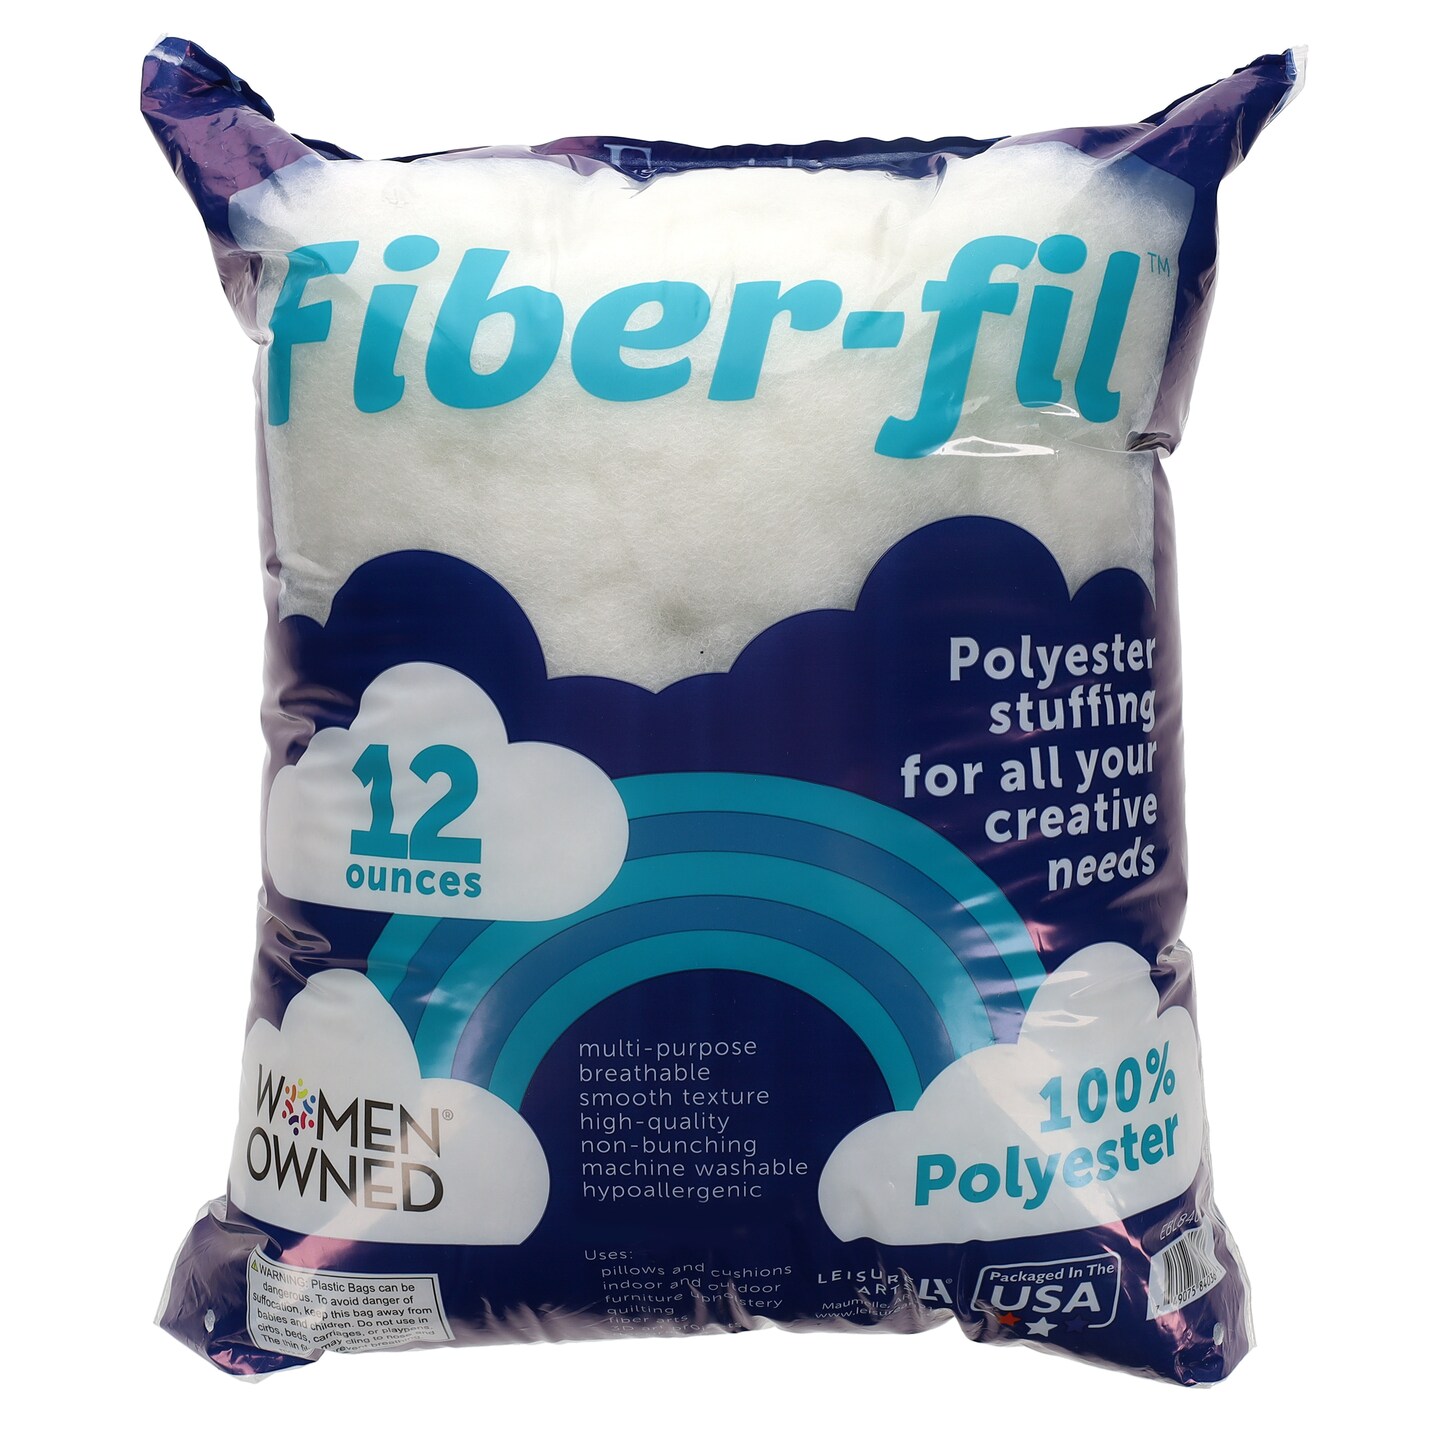 Essentials by Leisure Arts Polyester Fiber-Fil, Premium Fiber-Fil Stuffing, 12oz Bag, High Resilience Polyfill for filling Stuffed Animals, Crafts, Pillow Stuffing, Cushion Stuffing